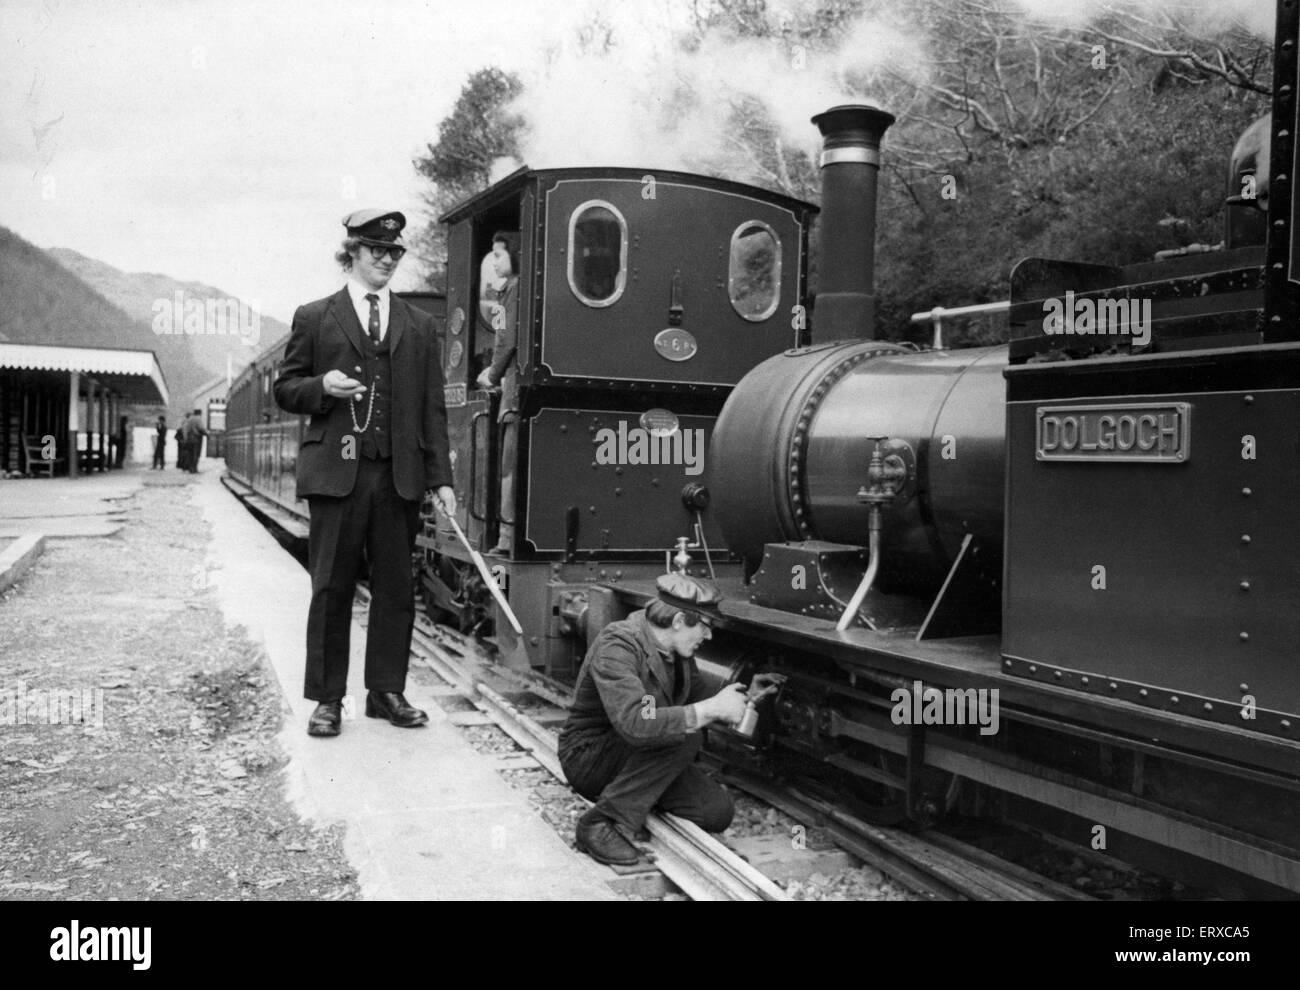 A woker applying some oil to one of the steam trains on the Talyllyn railway line which runs for 7.25 miles from Tywyn on the Mid-Wales coast to Nant Gwernol near the village of Abergynolwyn. 22nd April 1976. Stock Photo